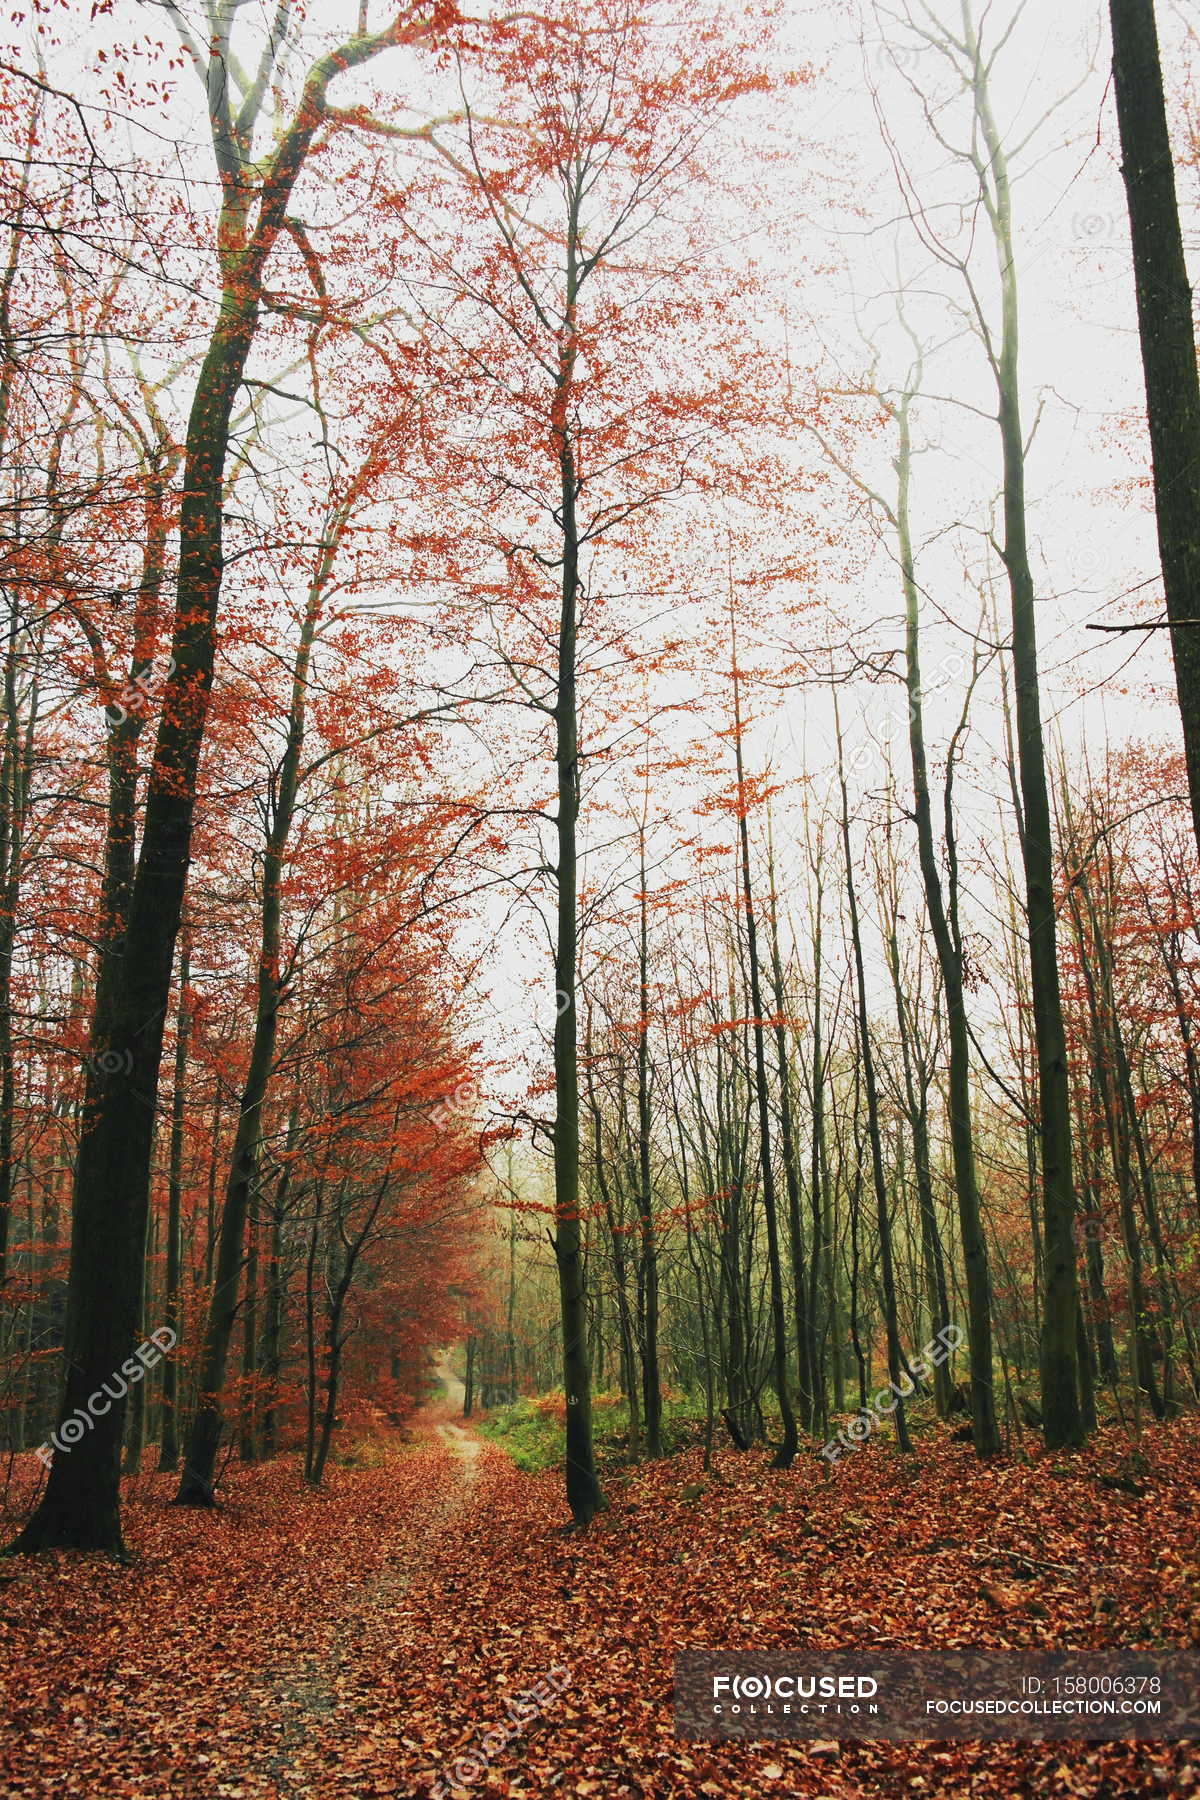 Wild forest at fall — Stock Photo | #158006378